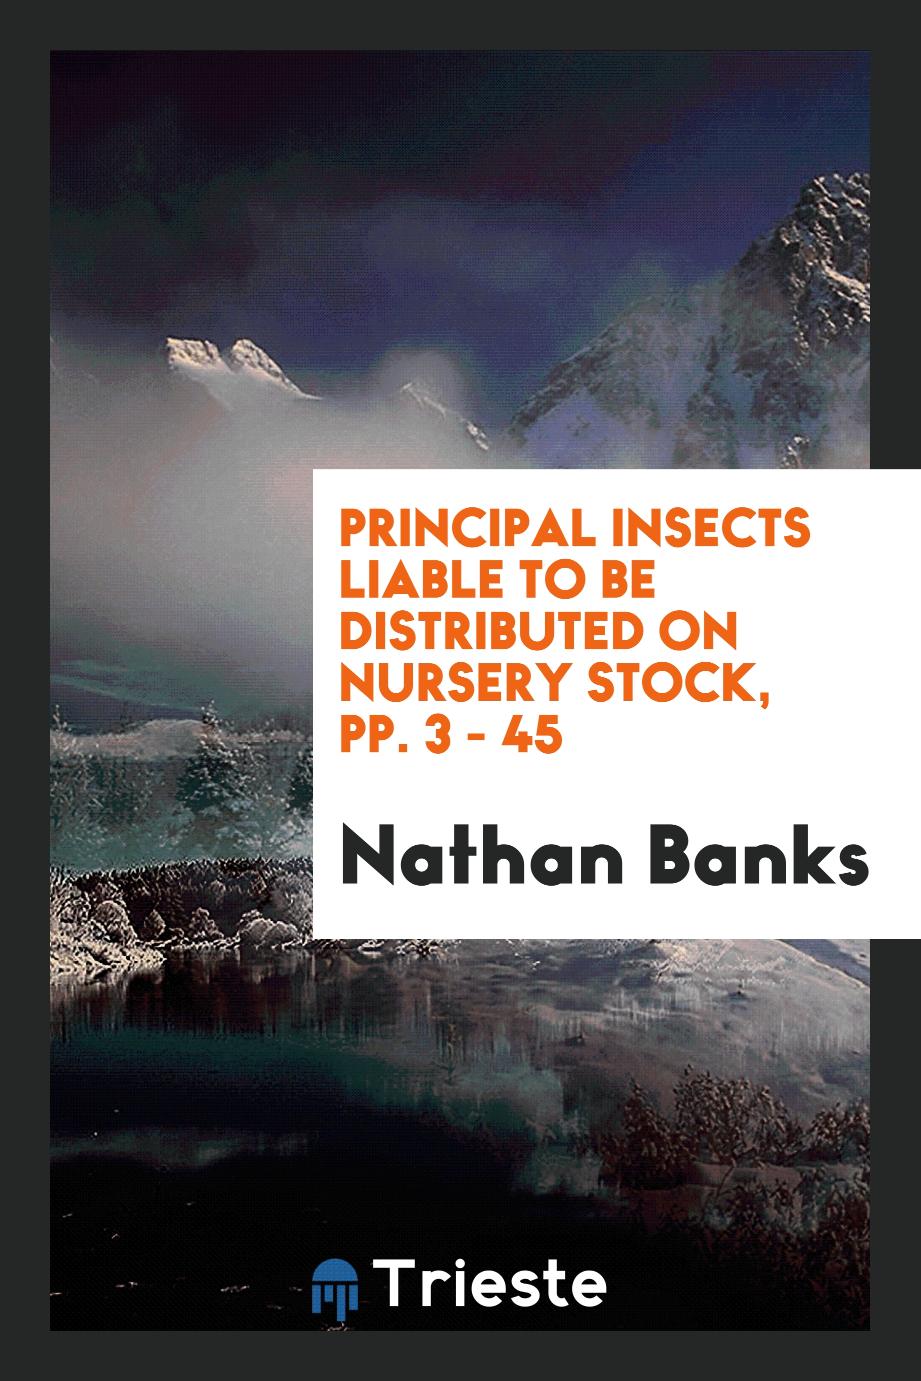 Principal Insects Liable to be Distributed on Nursery Stock, pp. 3 - 45